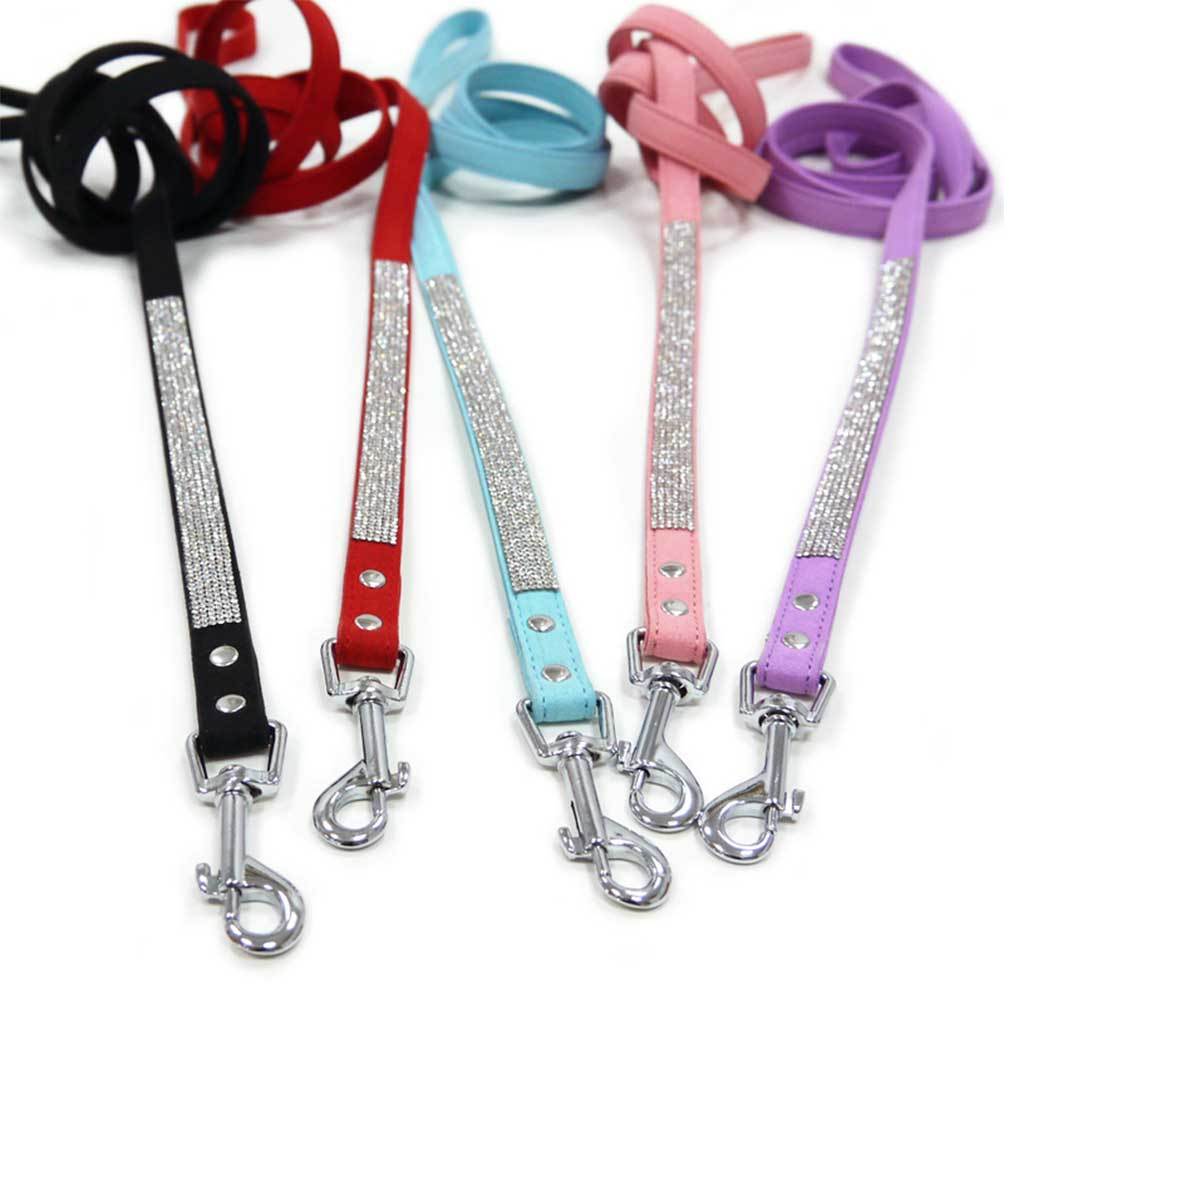 VIP Bling Dog Leash in Red | Pawlicious & Company